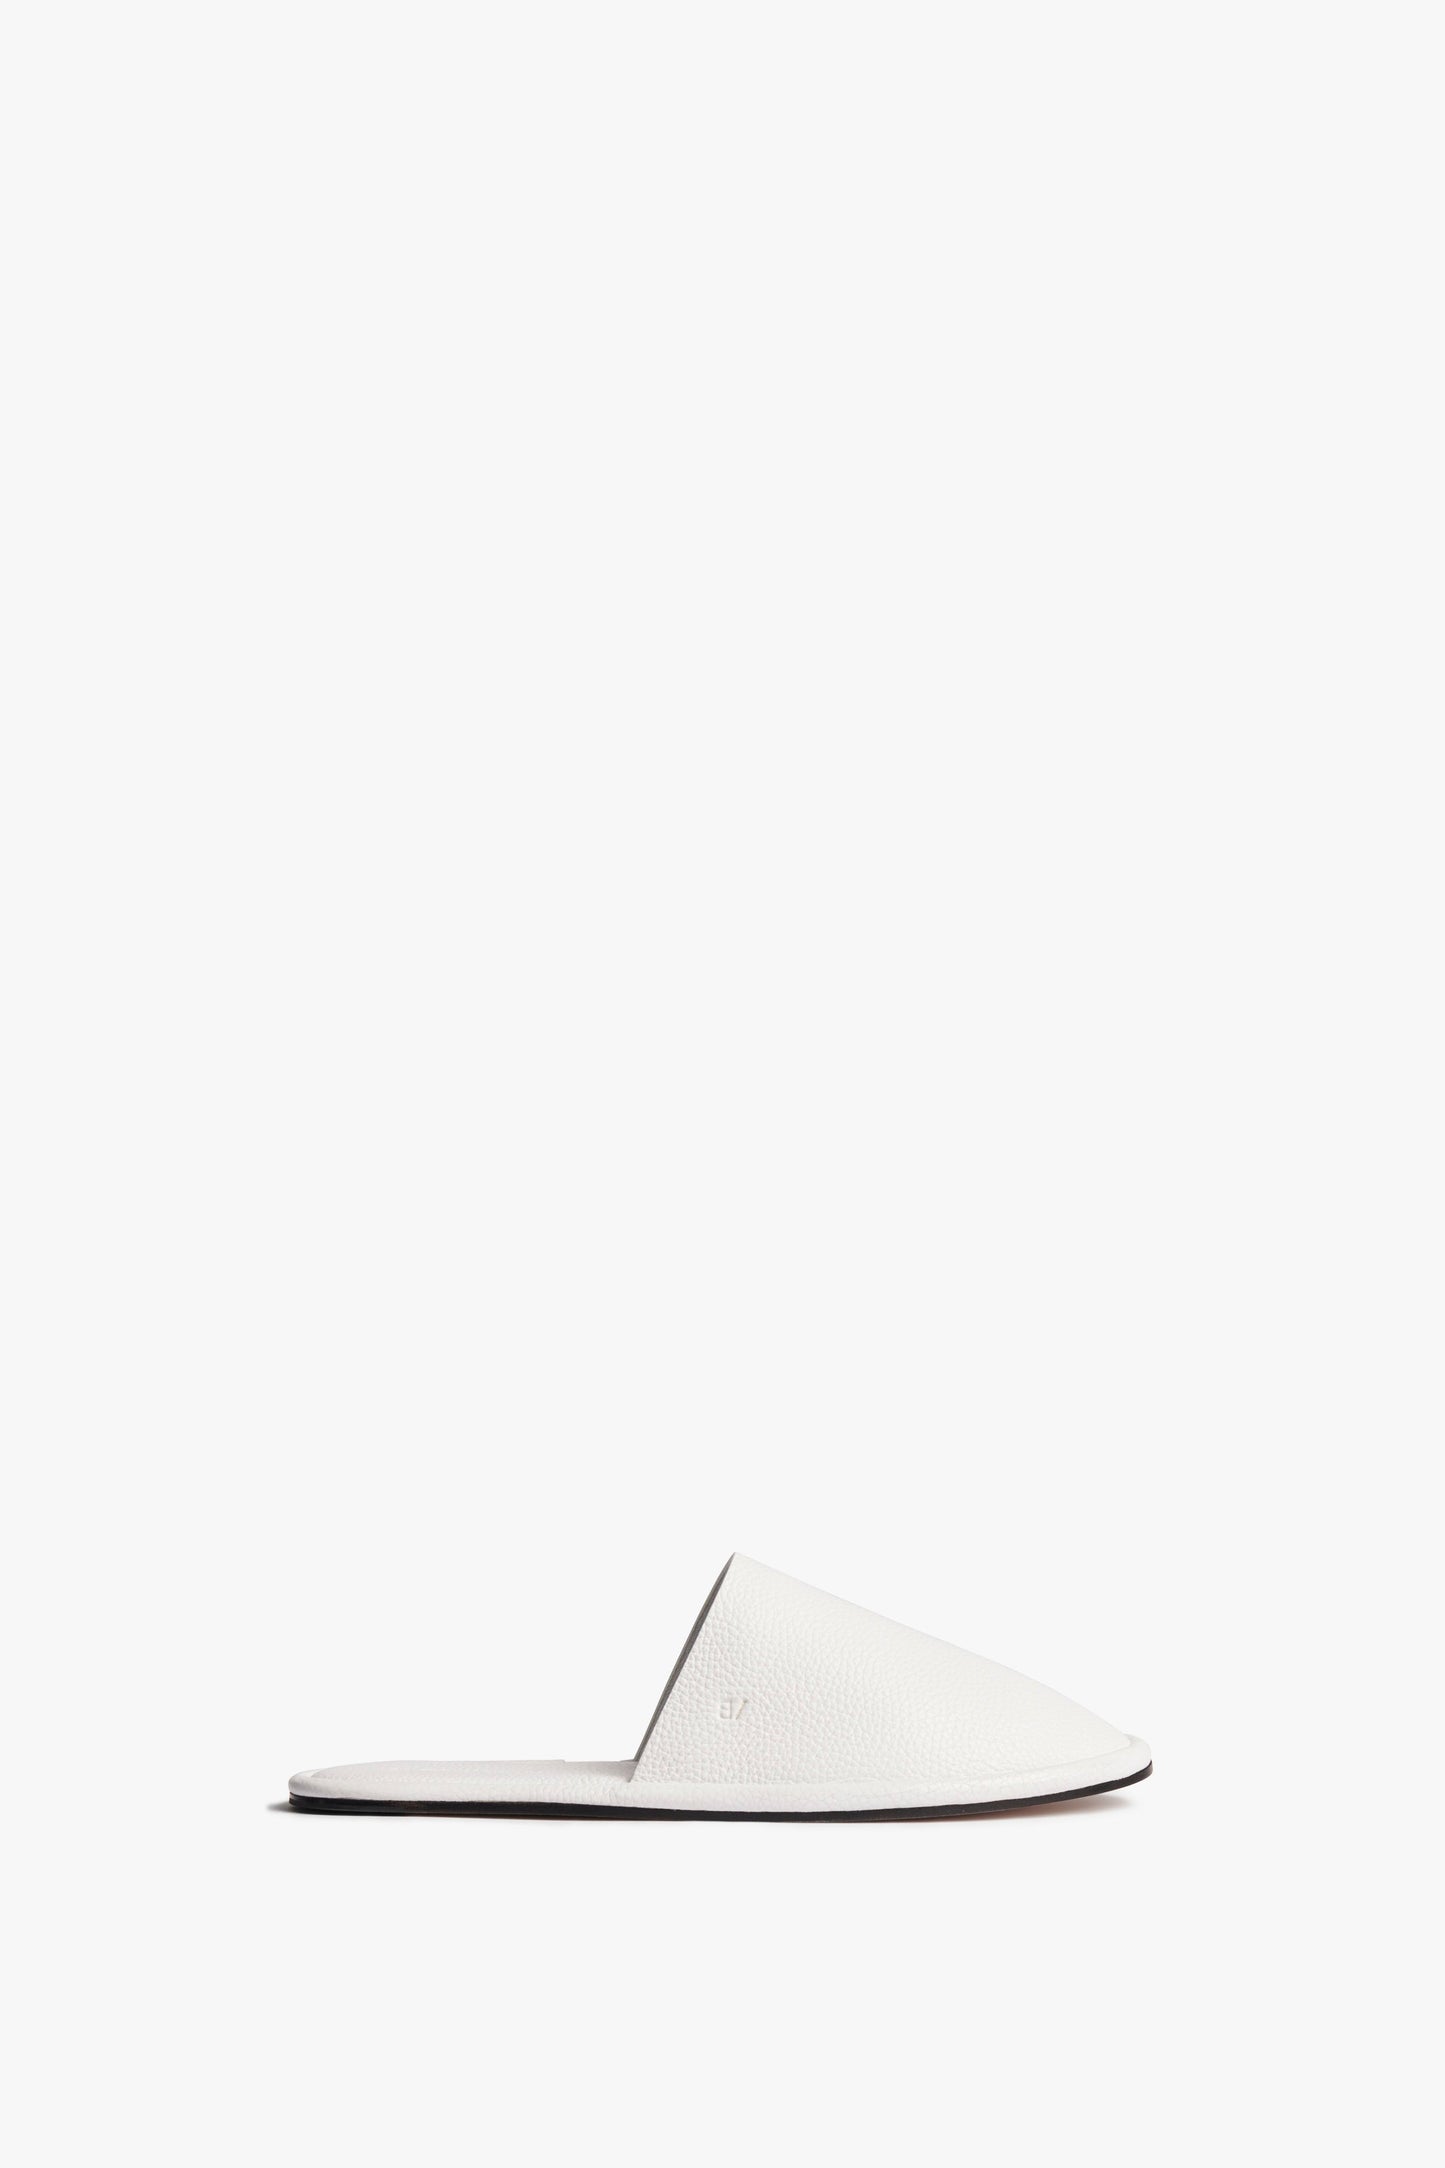 A plain white Victoria Beckham Amelia Leather Mule in White with a closed toe and open heel, displayed on a white background.